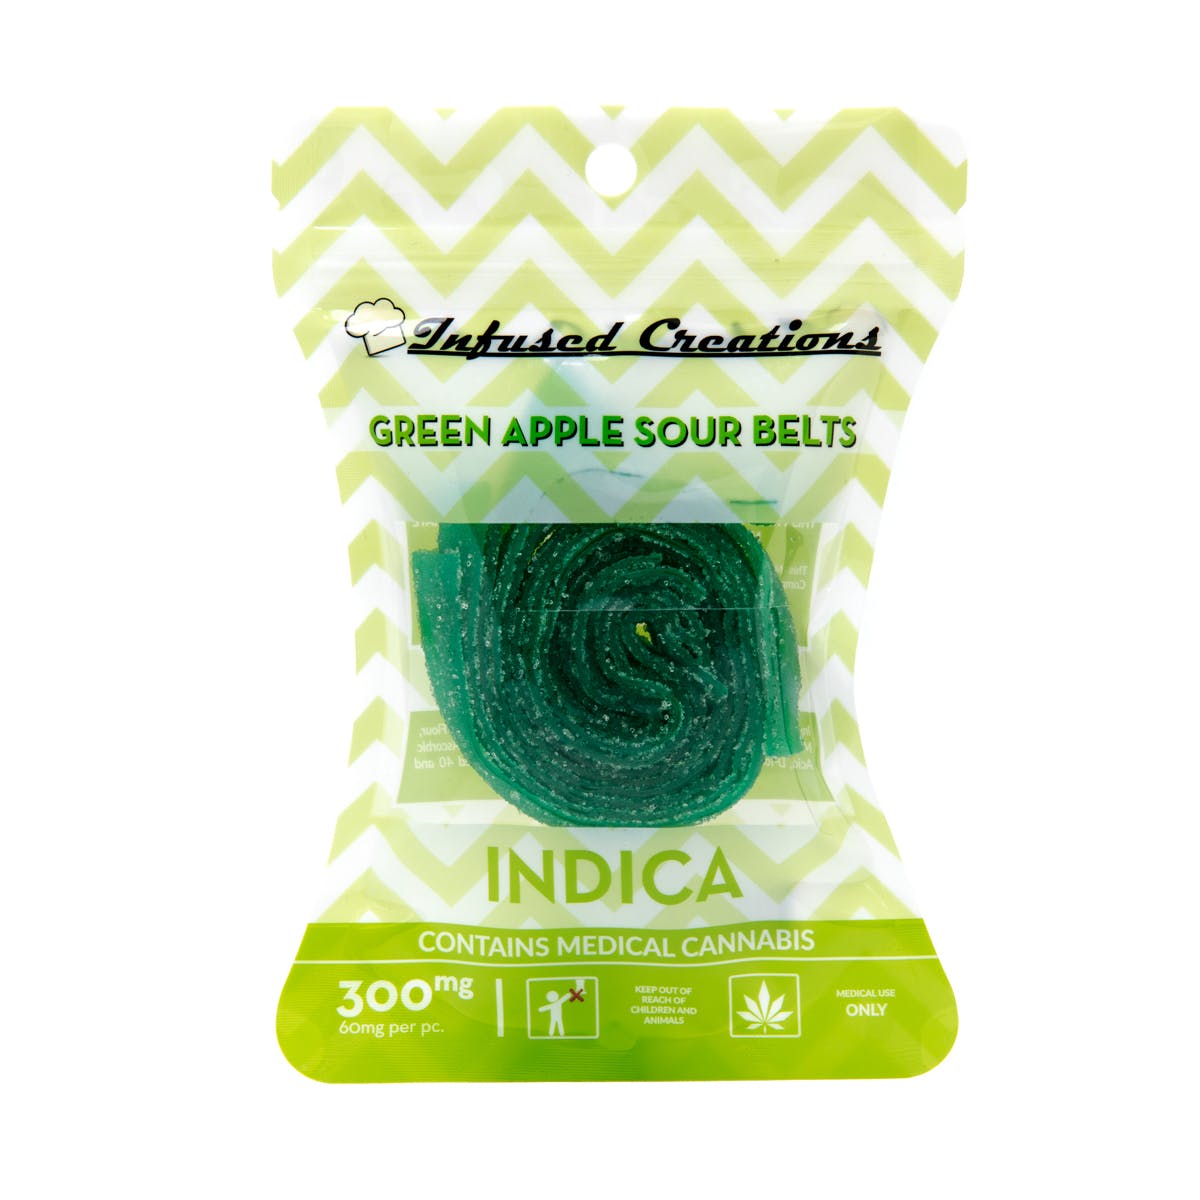 Green Apple Sour Belts Indica, 300mg